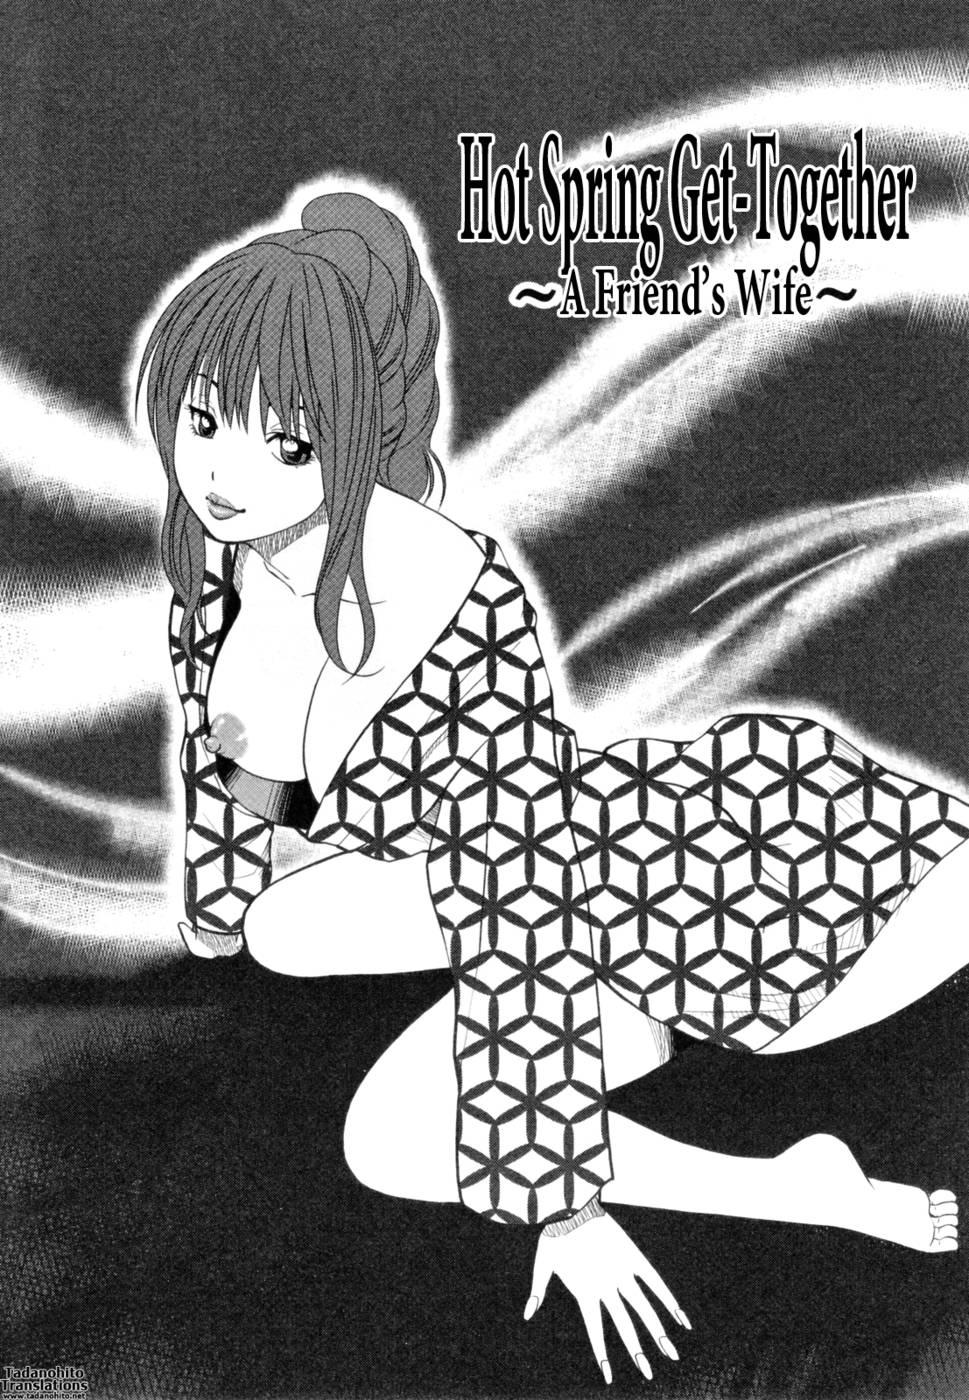 Hentai Manga Comic-32 Year Old Unsatisfied Wife-Chapter 3-Hot Spring Get-Together-A Friend's Wife-1